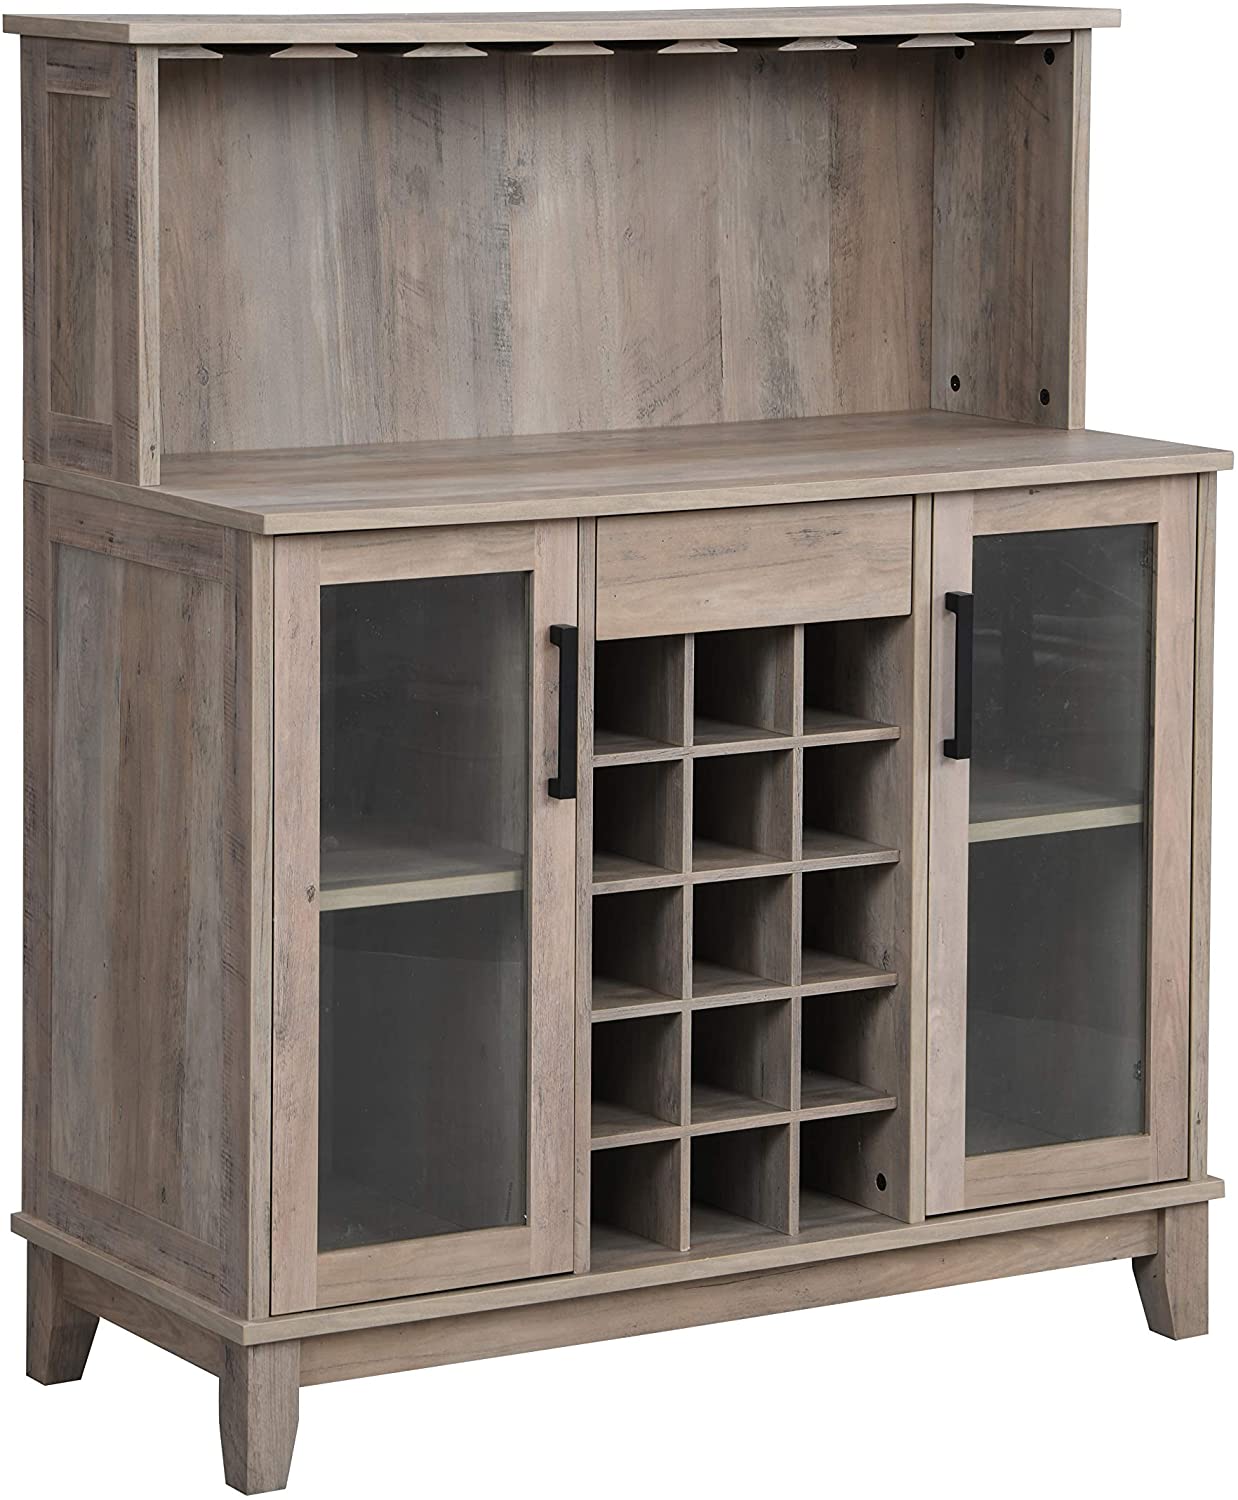 Bar Cabinet: Bar Cabinet with Wine Rack and Glass Doors in Grey Wash Finish 